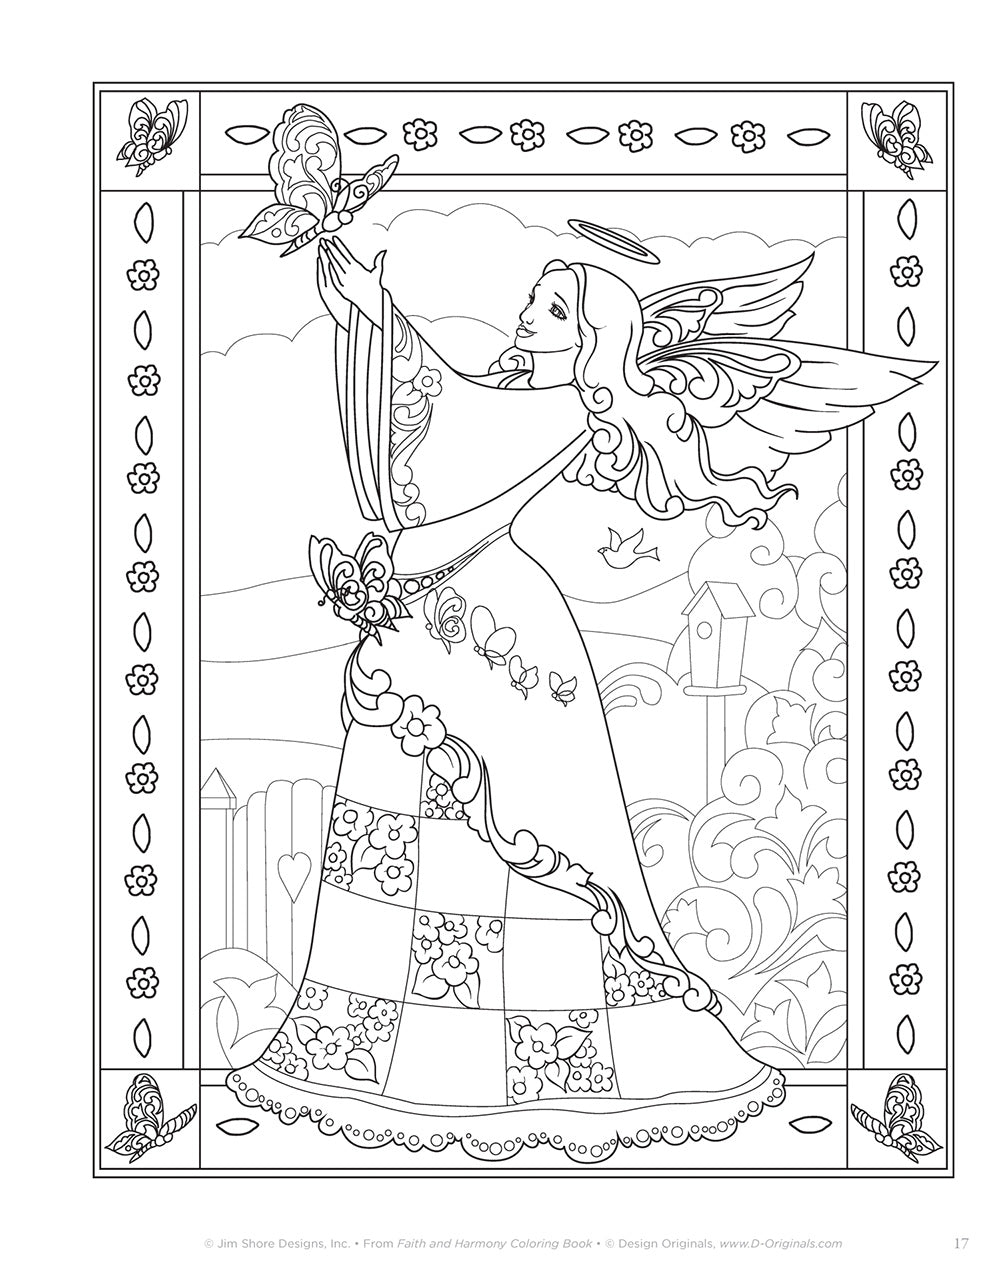 Faith and Harmony Coloring Book